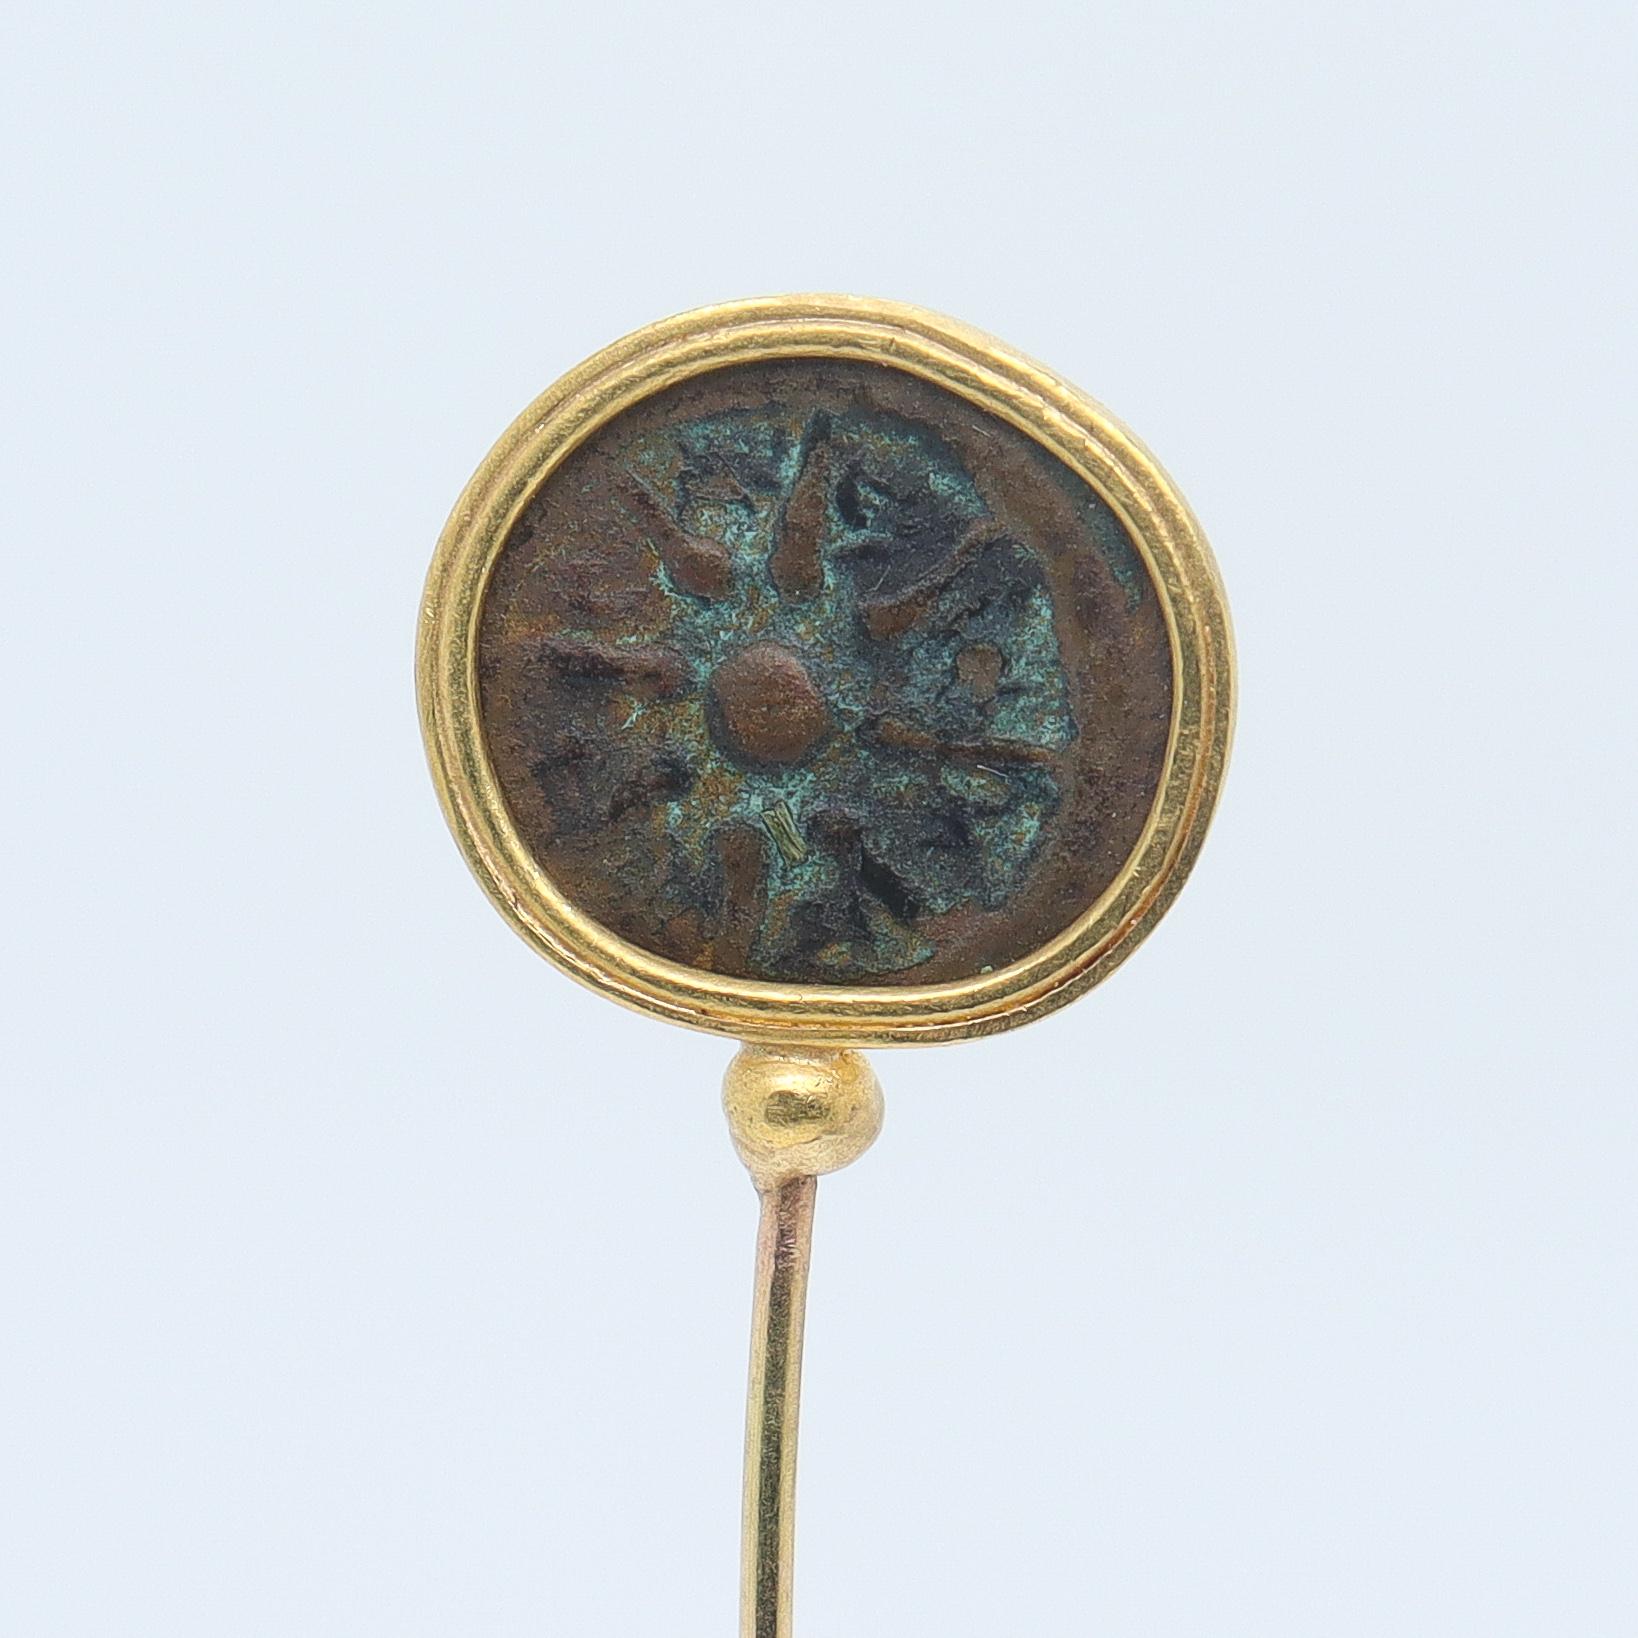 A gold and ancient Roman bronze coin stickpin.

The bronze coin is bezel set in a high karat (18k or higher) gold bezel. 

The pin stem itself is 14k. 

Simply a wonderful piece of the ancient world!

Overall Condition:
It is in overall good,